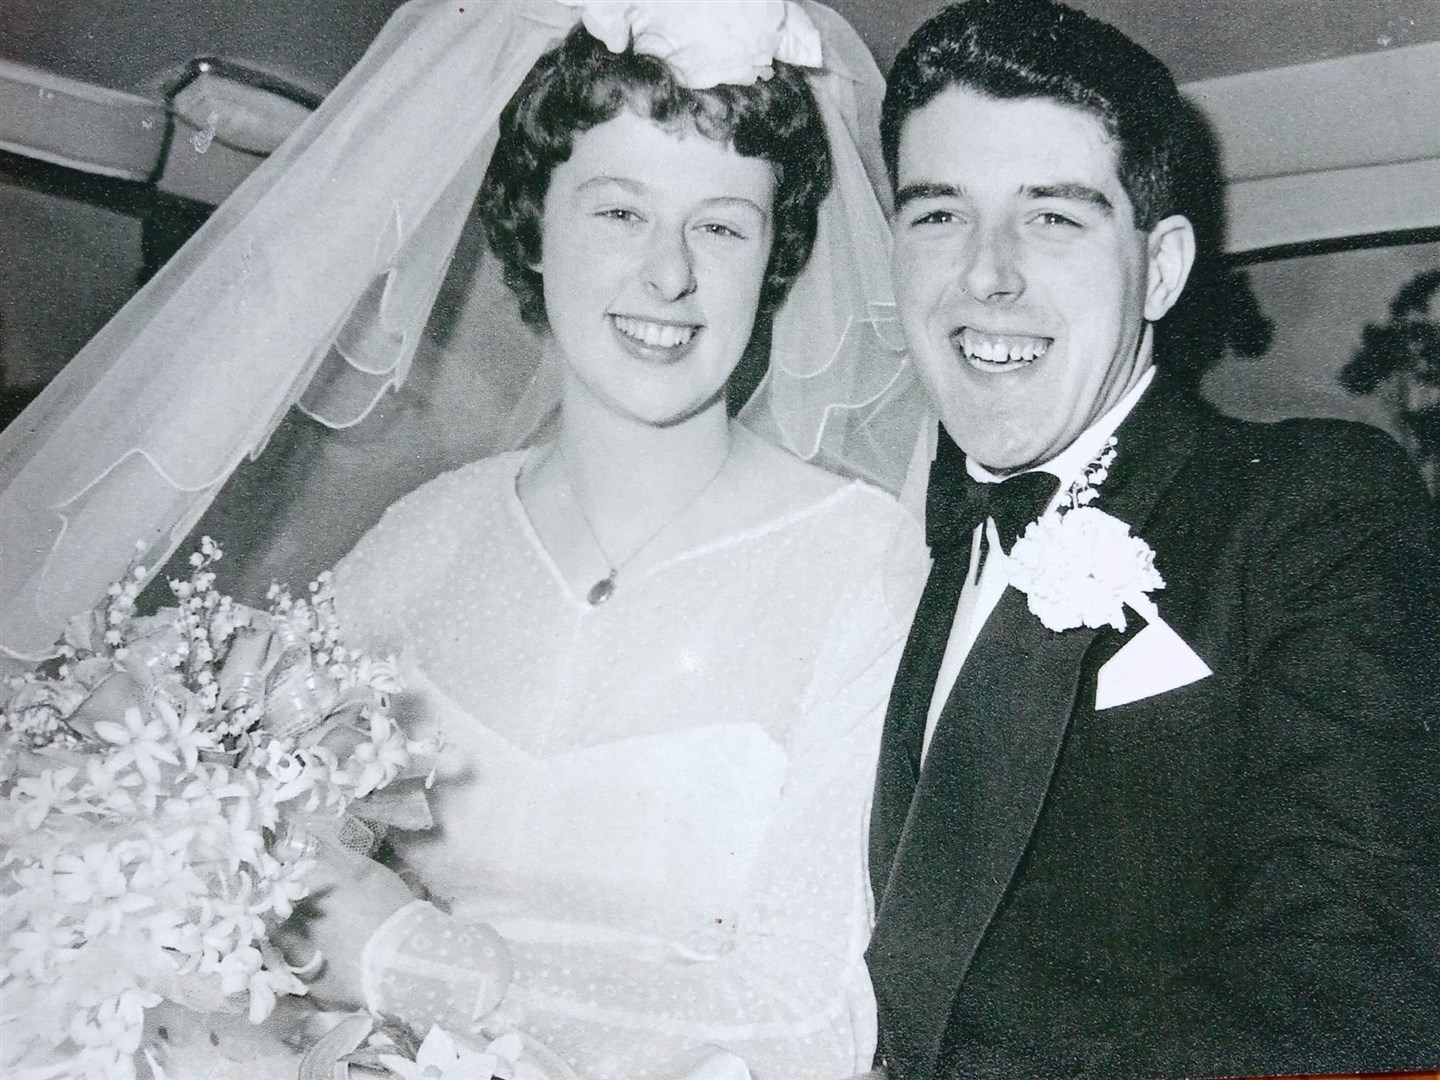 Ken and Lorna Robertson, from Lossiemouth, on their wedding day on March 28, 1961.